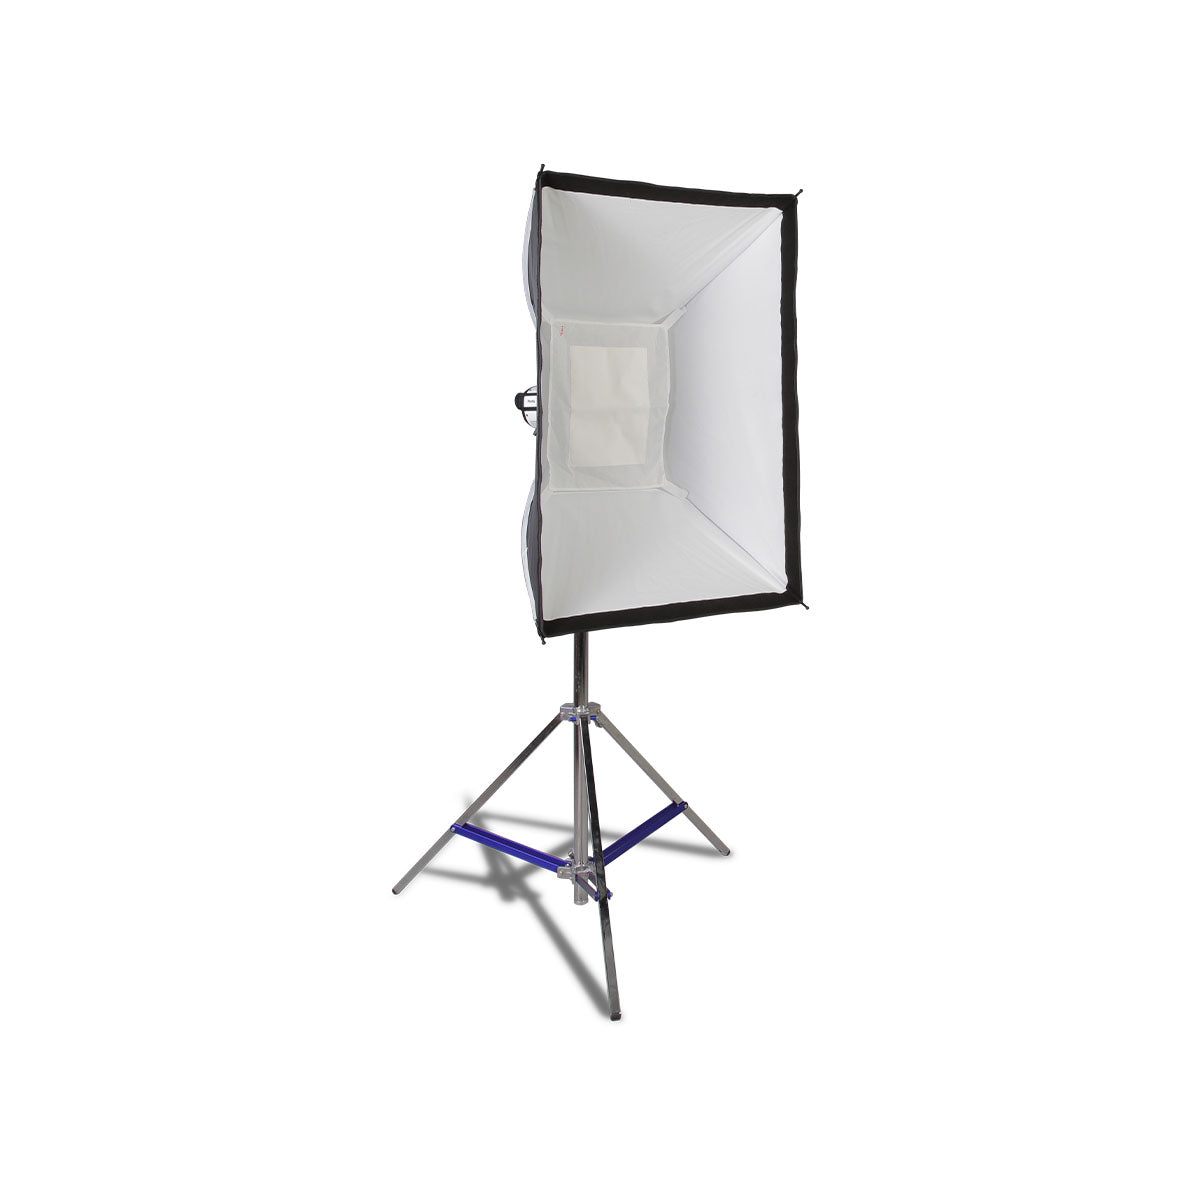 Phottix PH83726 G-Capsule 60 x 90cm EZ-Up Modifier Panoramic Rectangular Softbox with One Push Release Unlock Button, Magnetic Gel Filter Holder and Bowens Mount for Photography